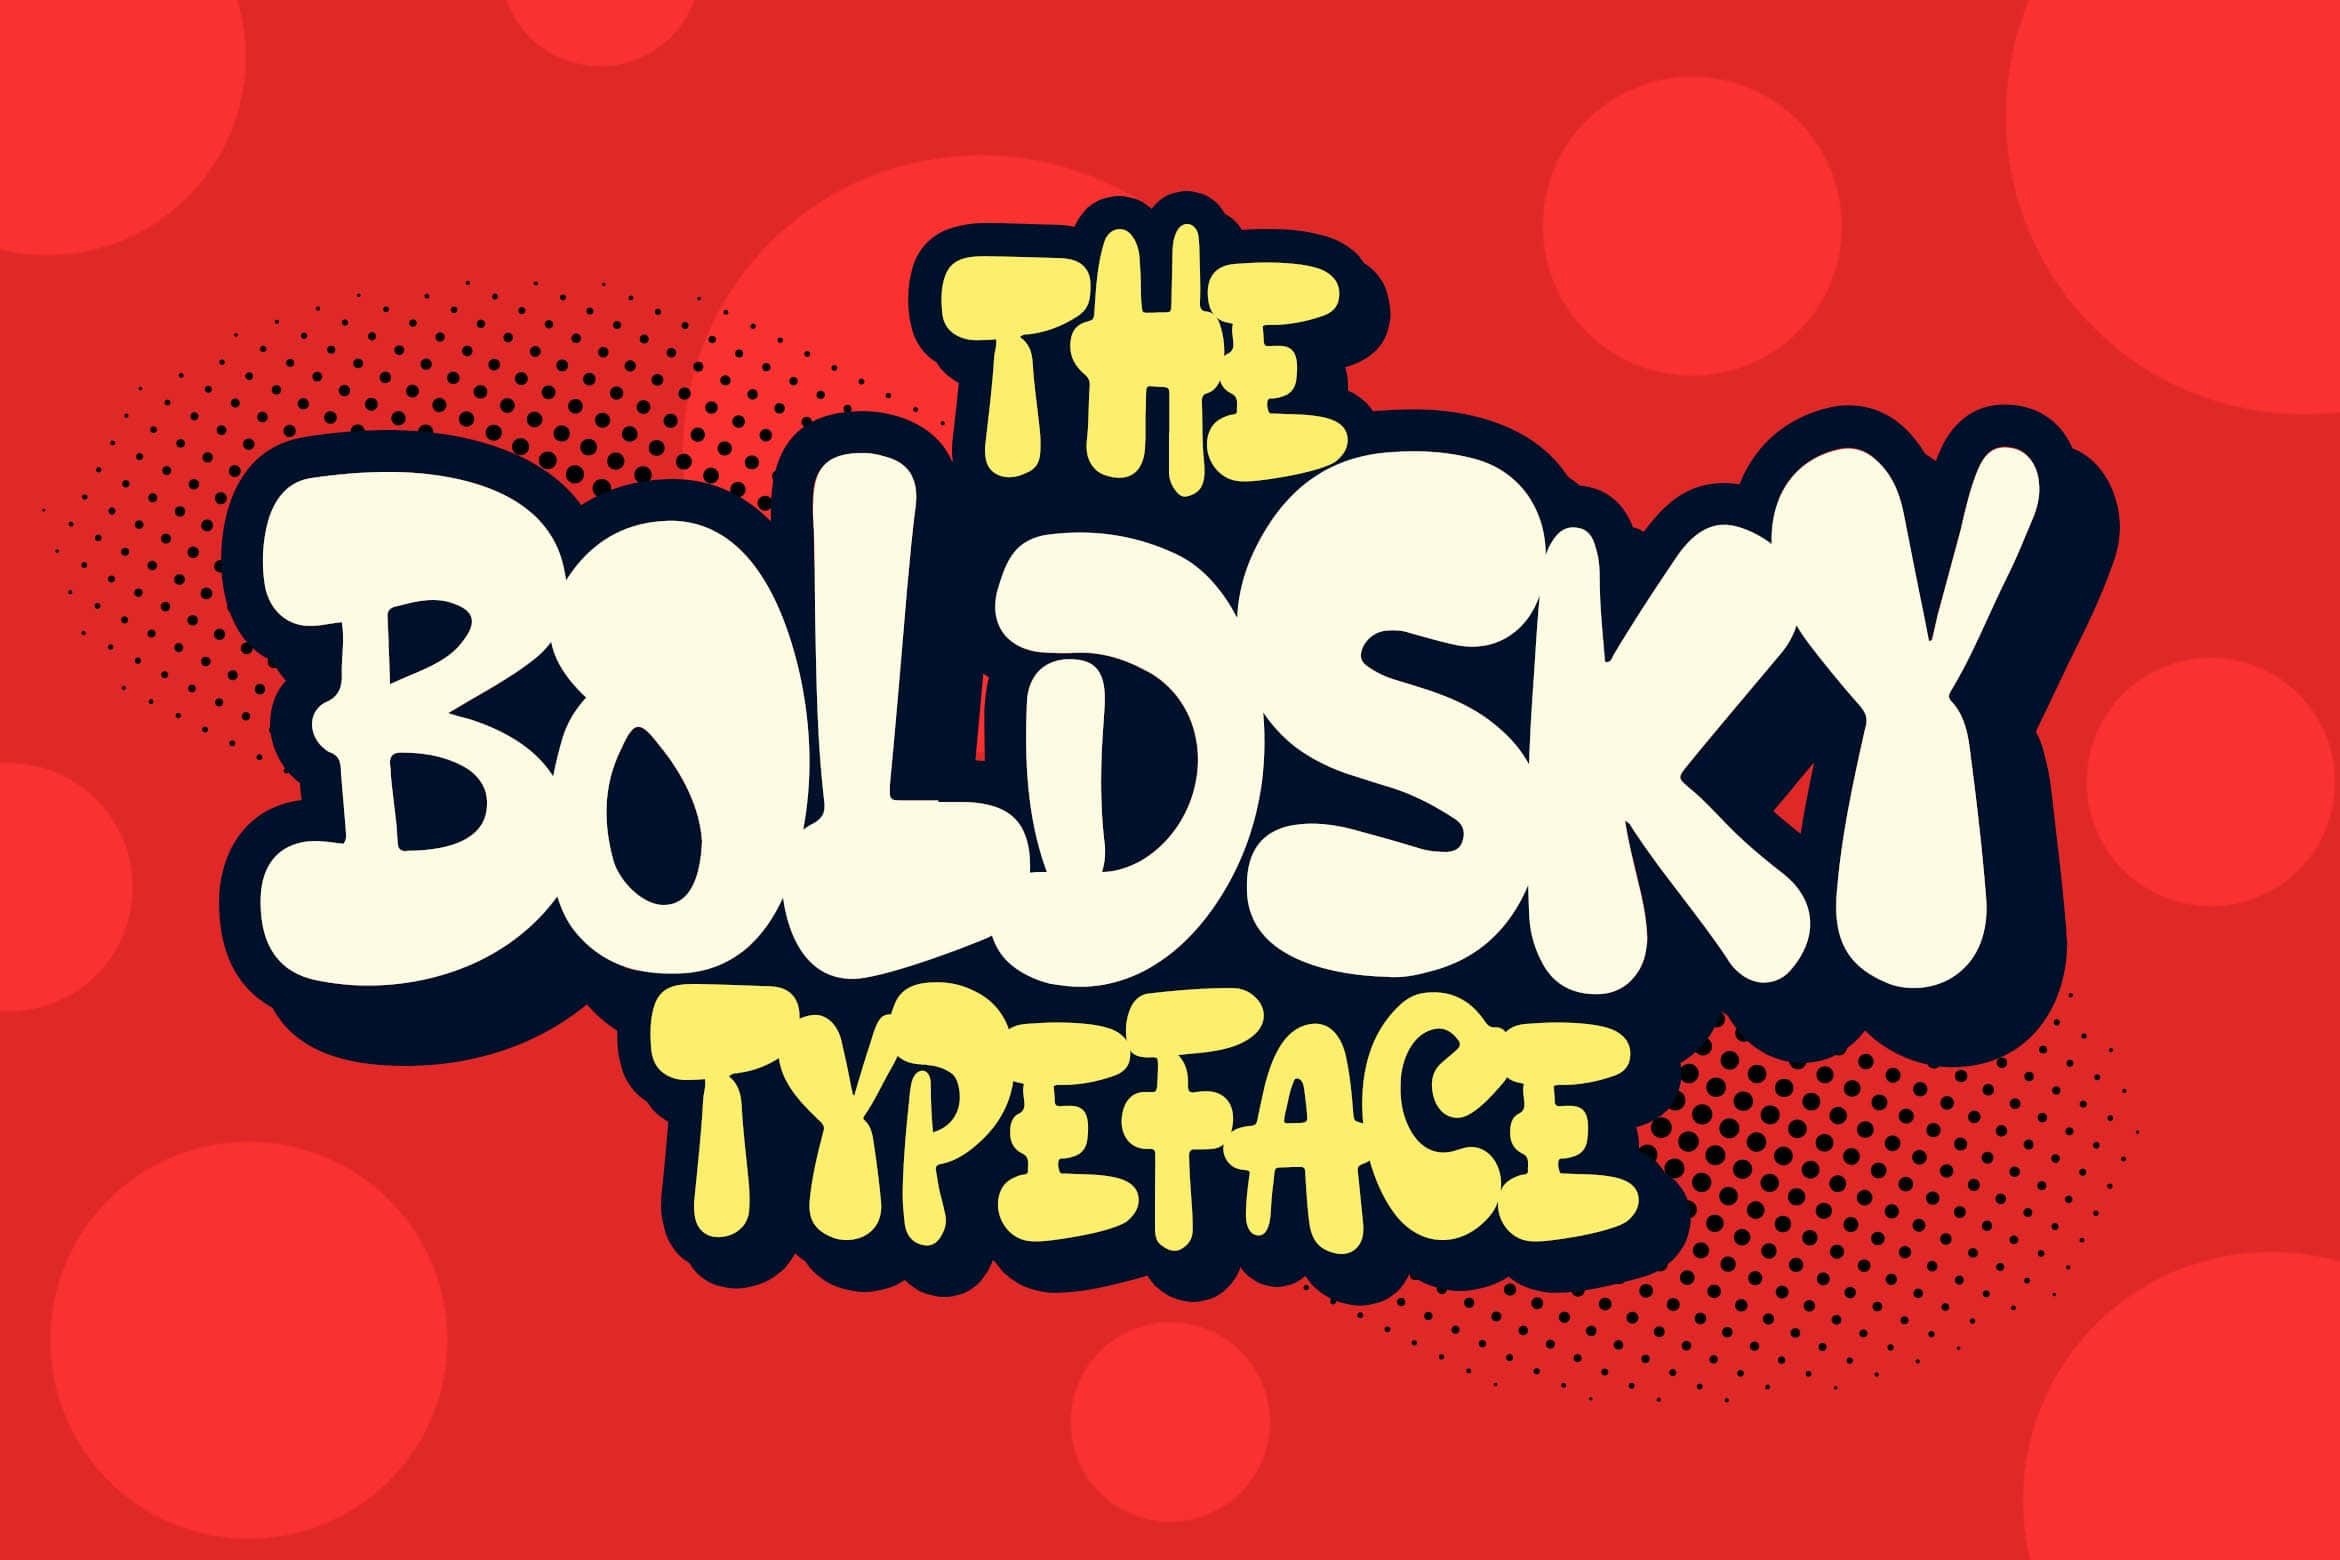 Boldsky Extrude Font preview